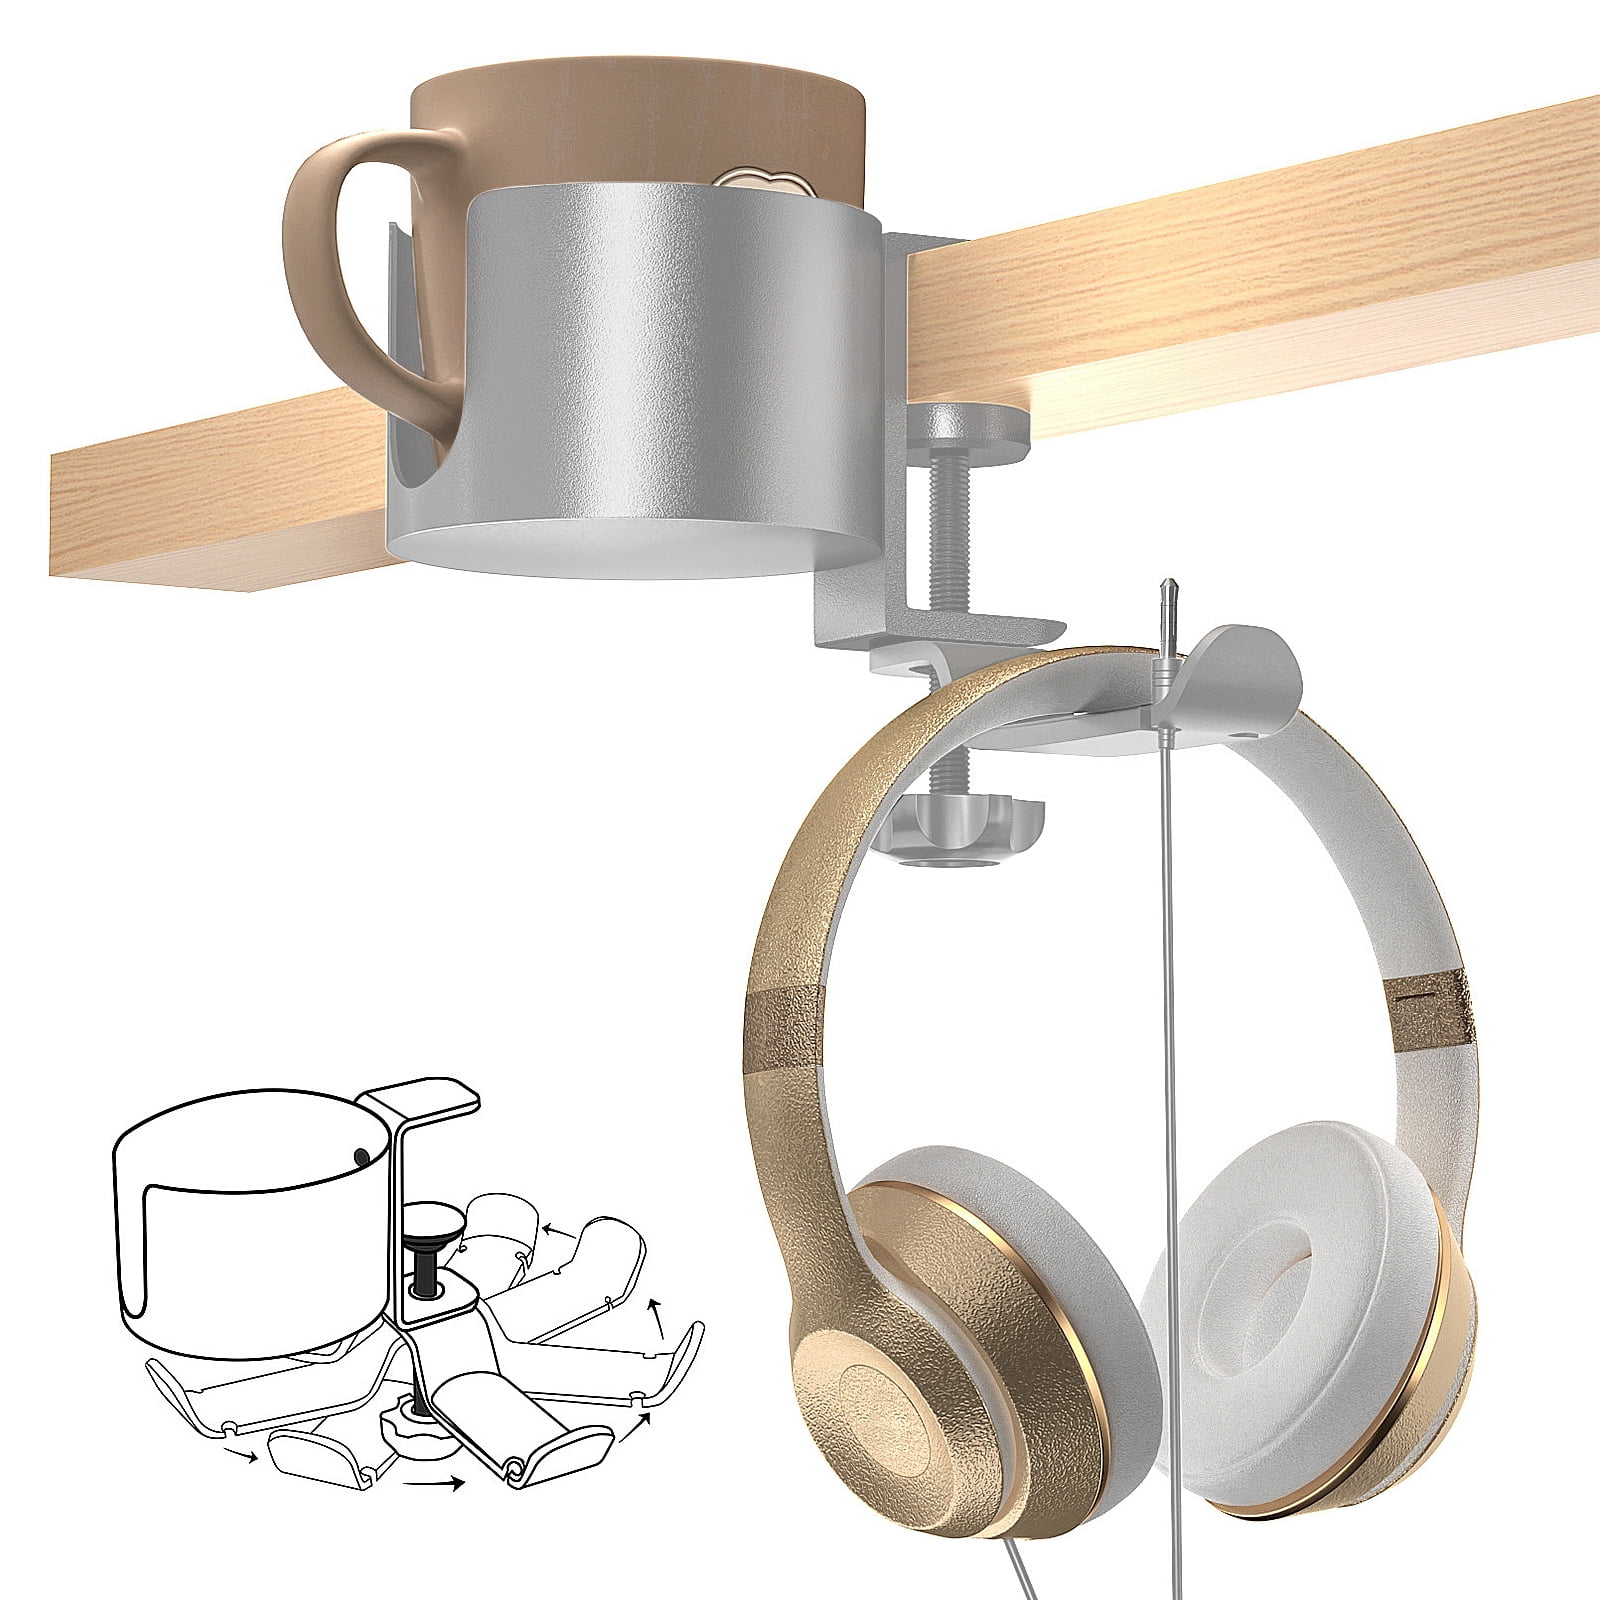 Desk Cup Holder With Headphone Hanger For Desk In Home, Anti-spill Cup  Holder For Desk, Table Cup Holder For Water Bottles, Wheelchairs,  Workstations